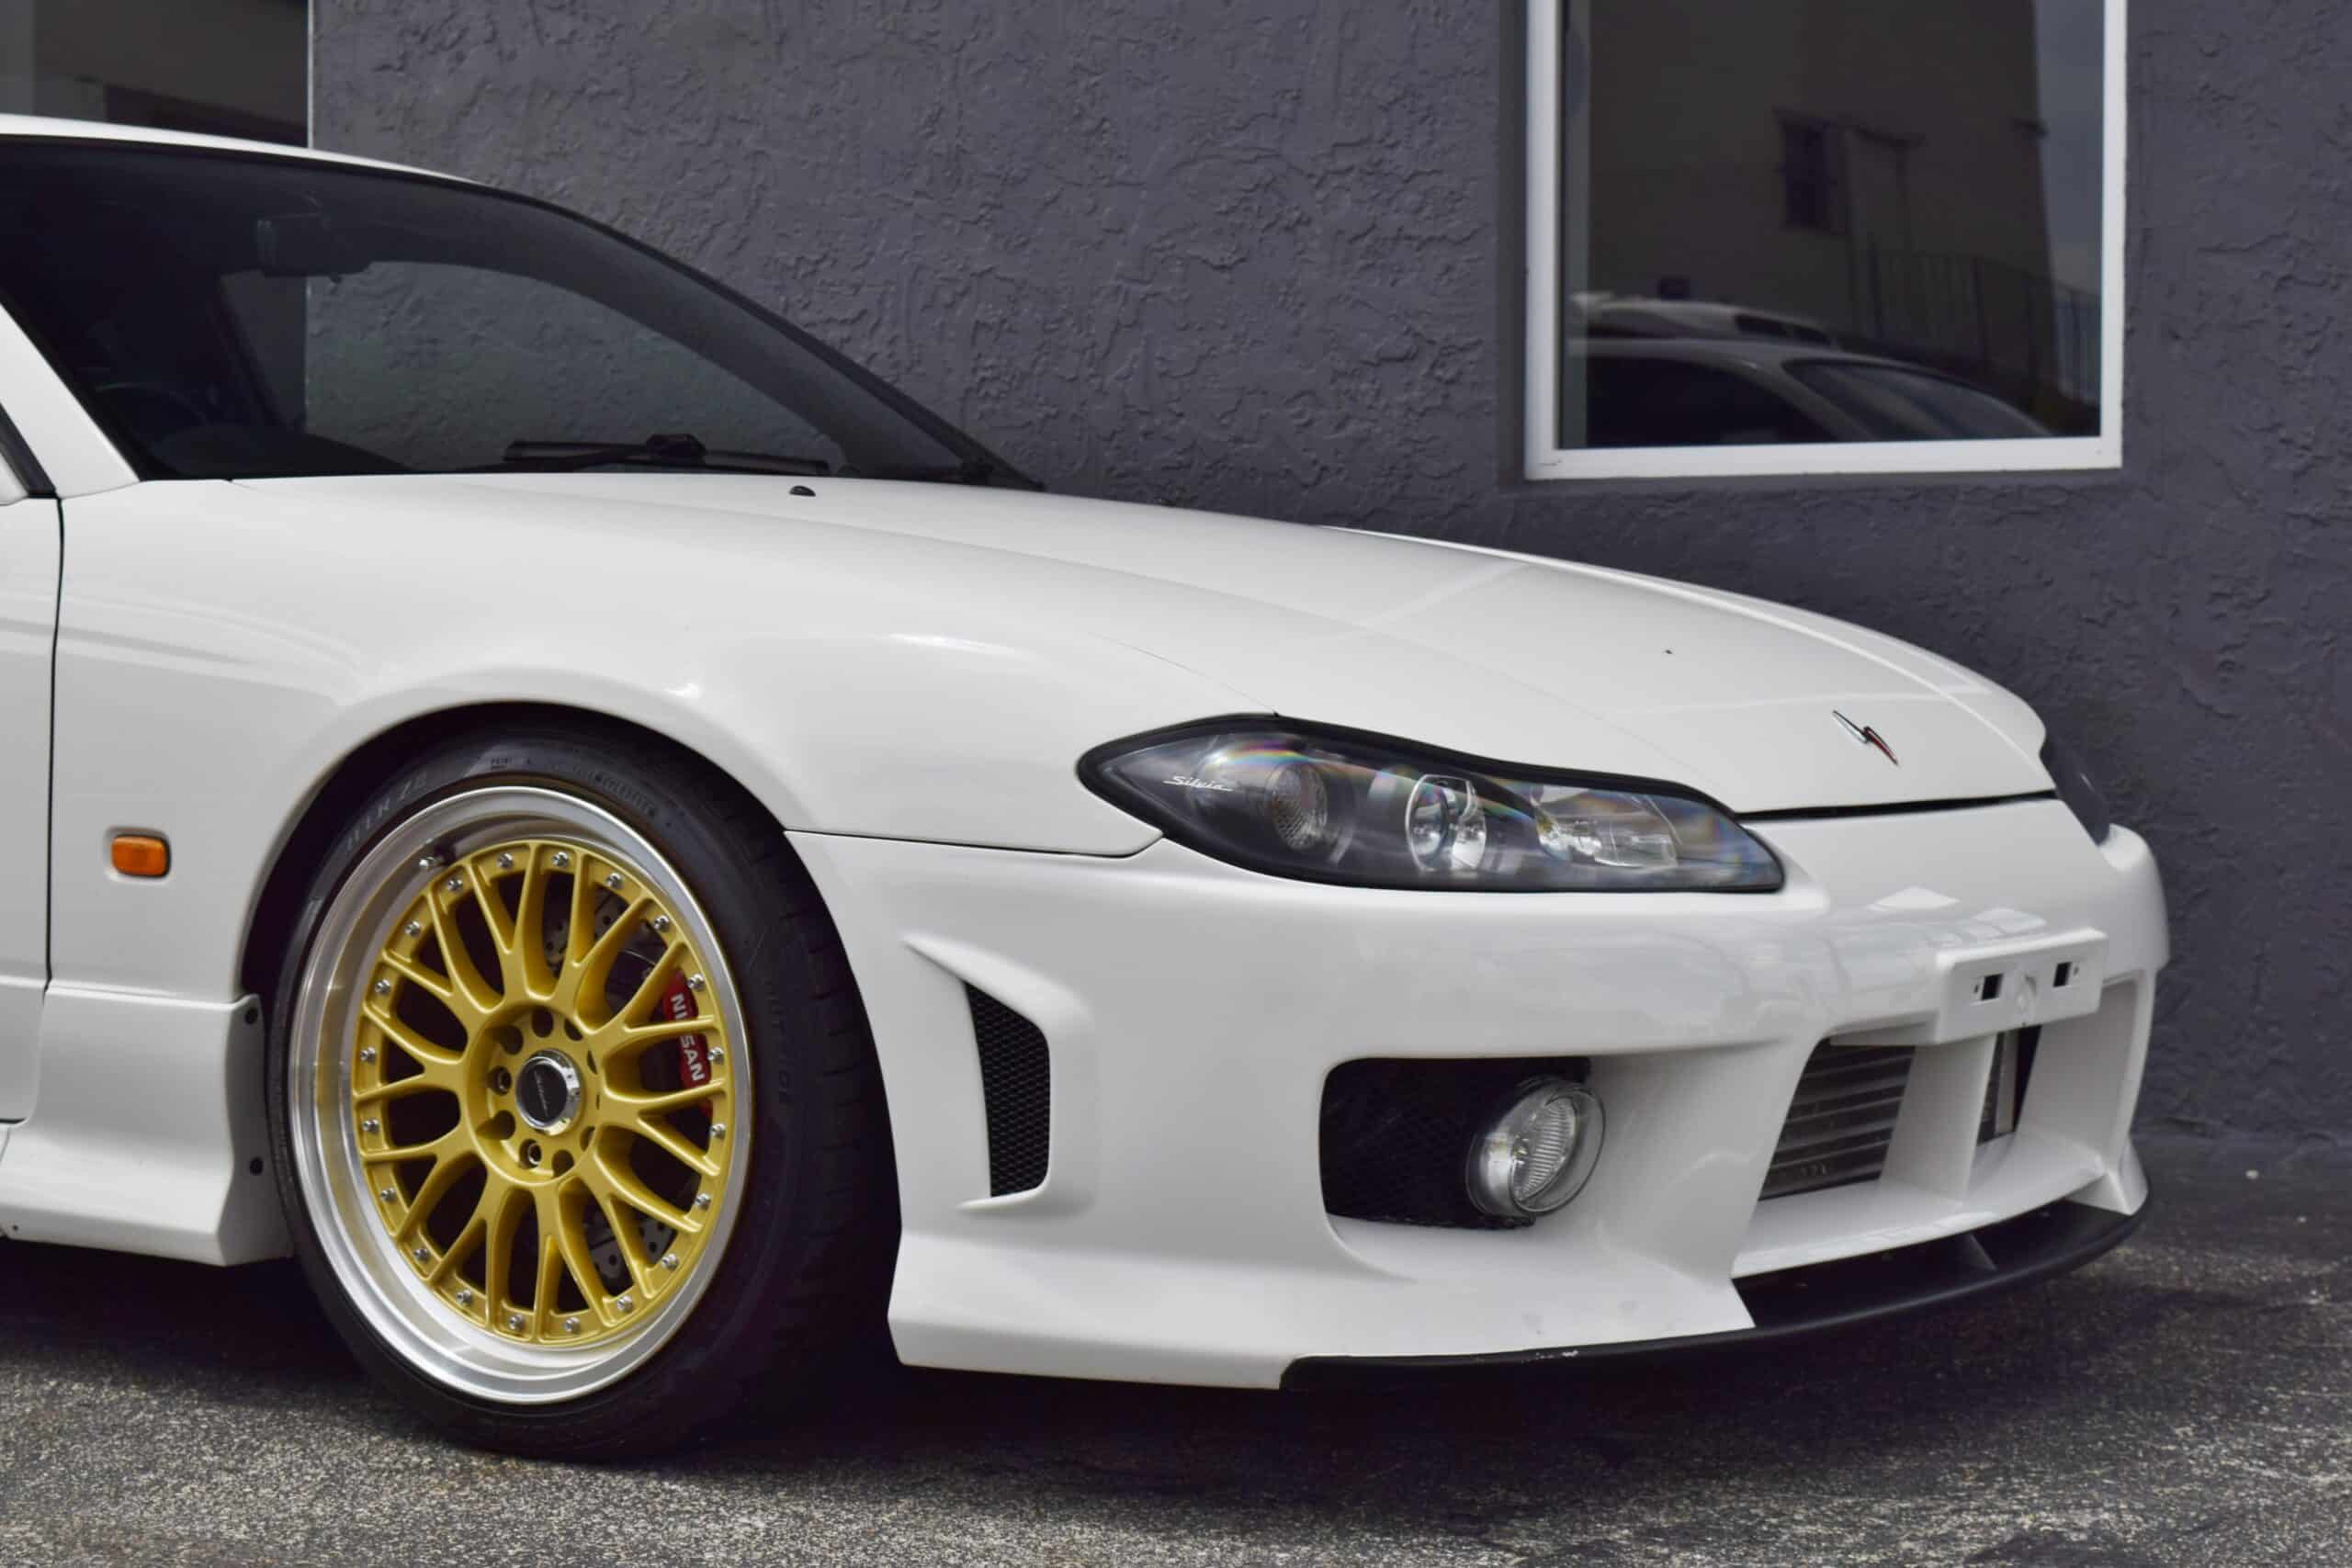 1999 Nissan 240SX Silvia S15 Spec R SR20 Turbo 375HP Well Sorted 6 speed manual with New Tein Coilovers/ New Clutch